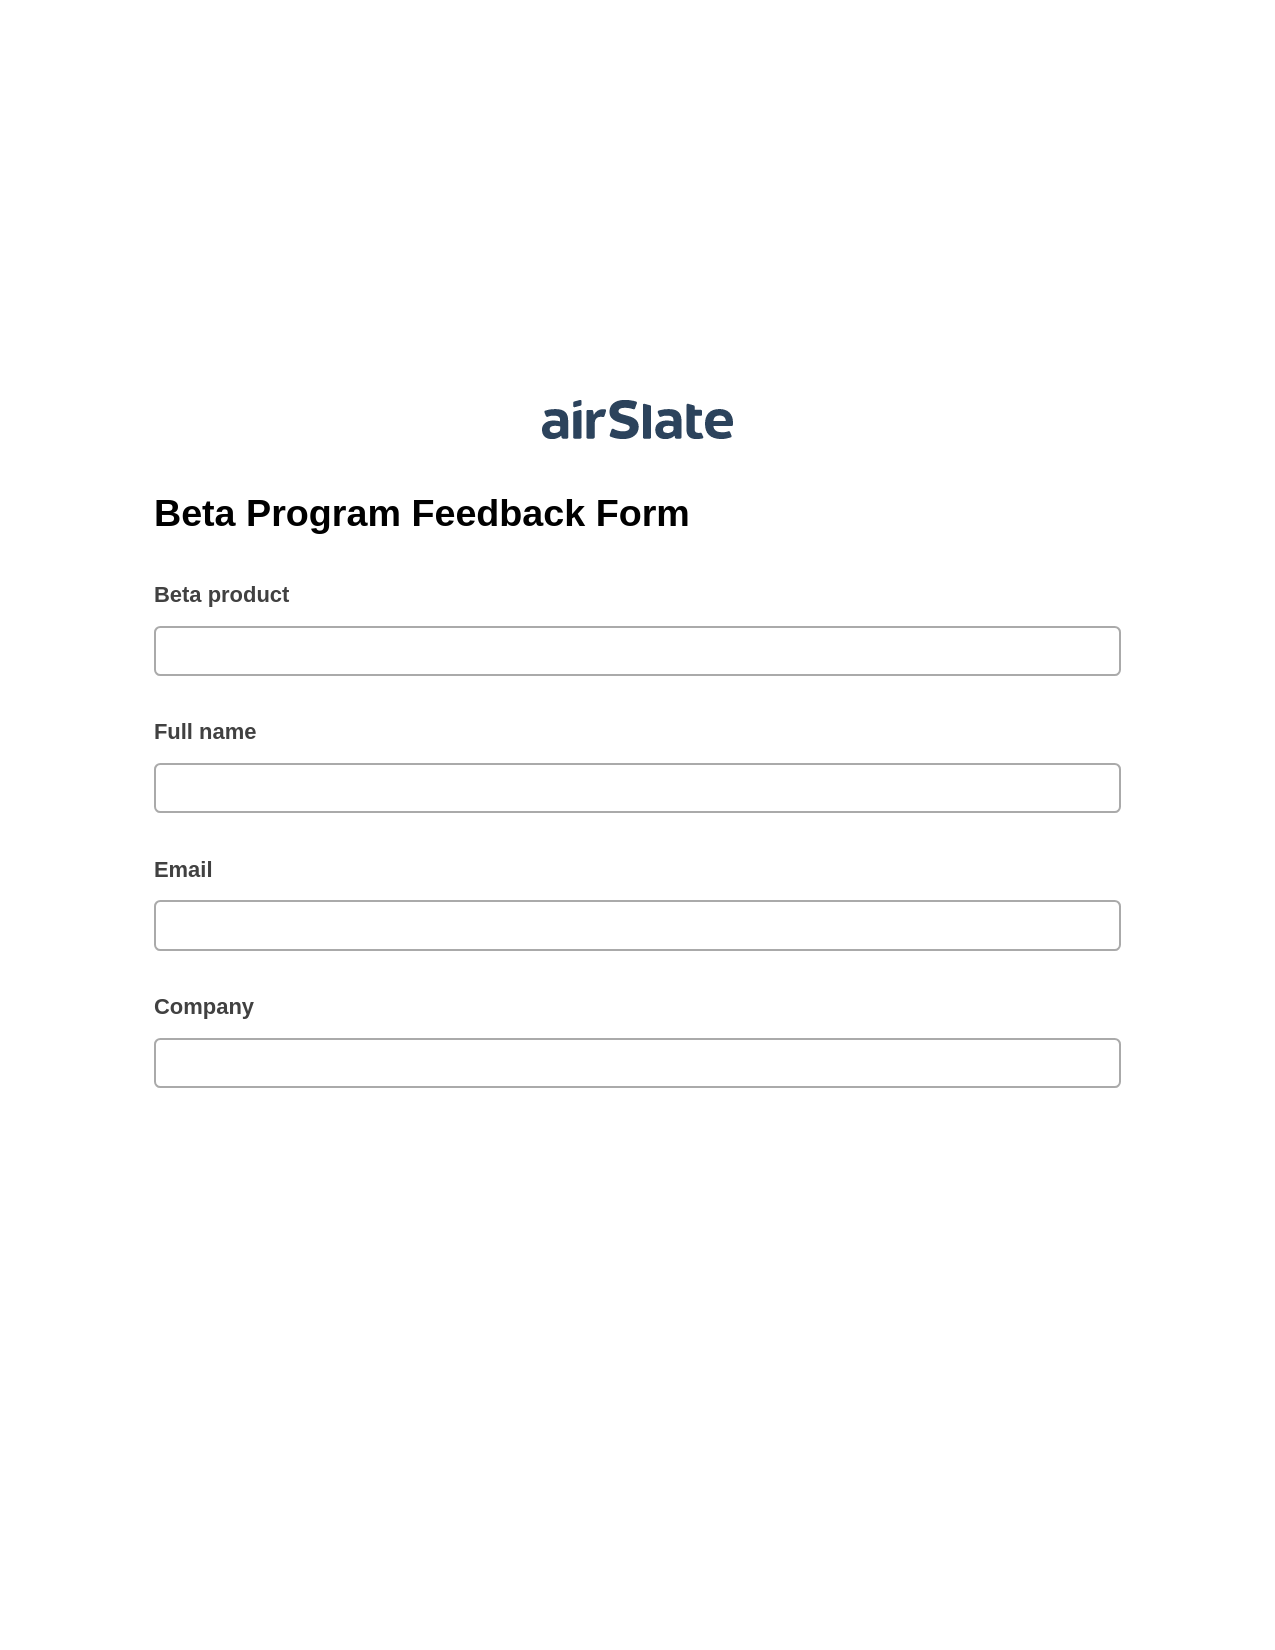 Beta Program Feedback Form Pre-fill from another Slate Bot, Open as Role Bot, Export to Excel 365 Bot